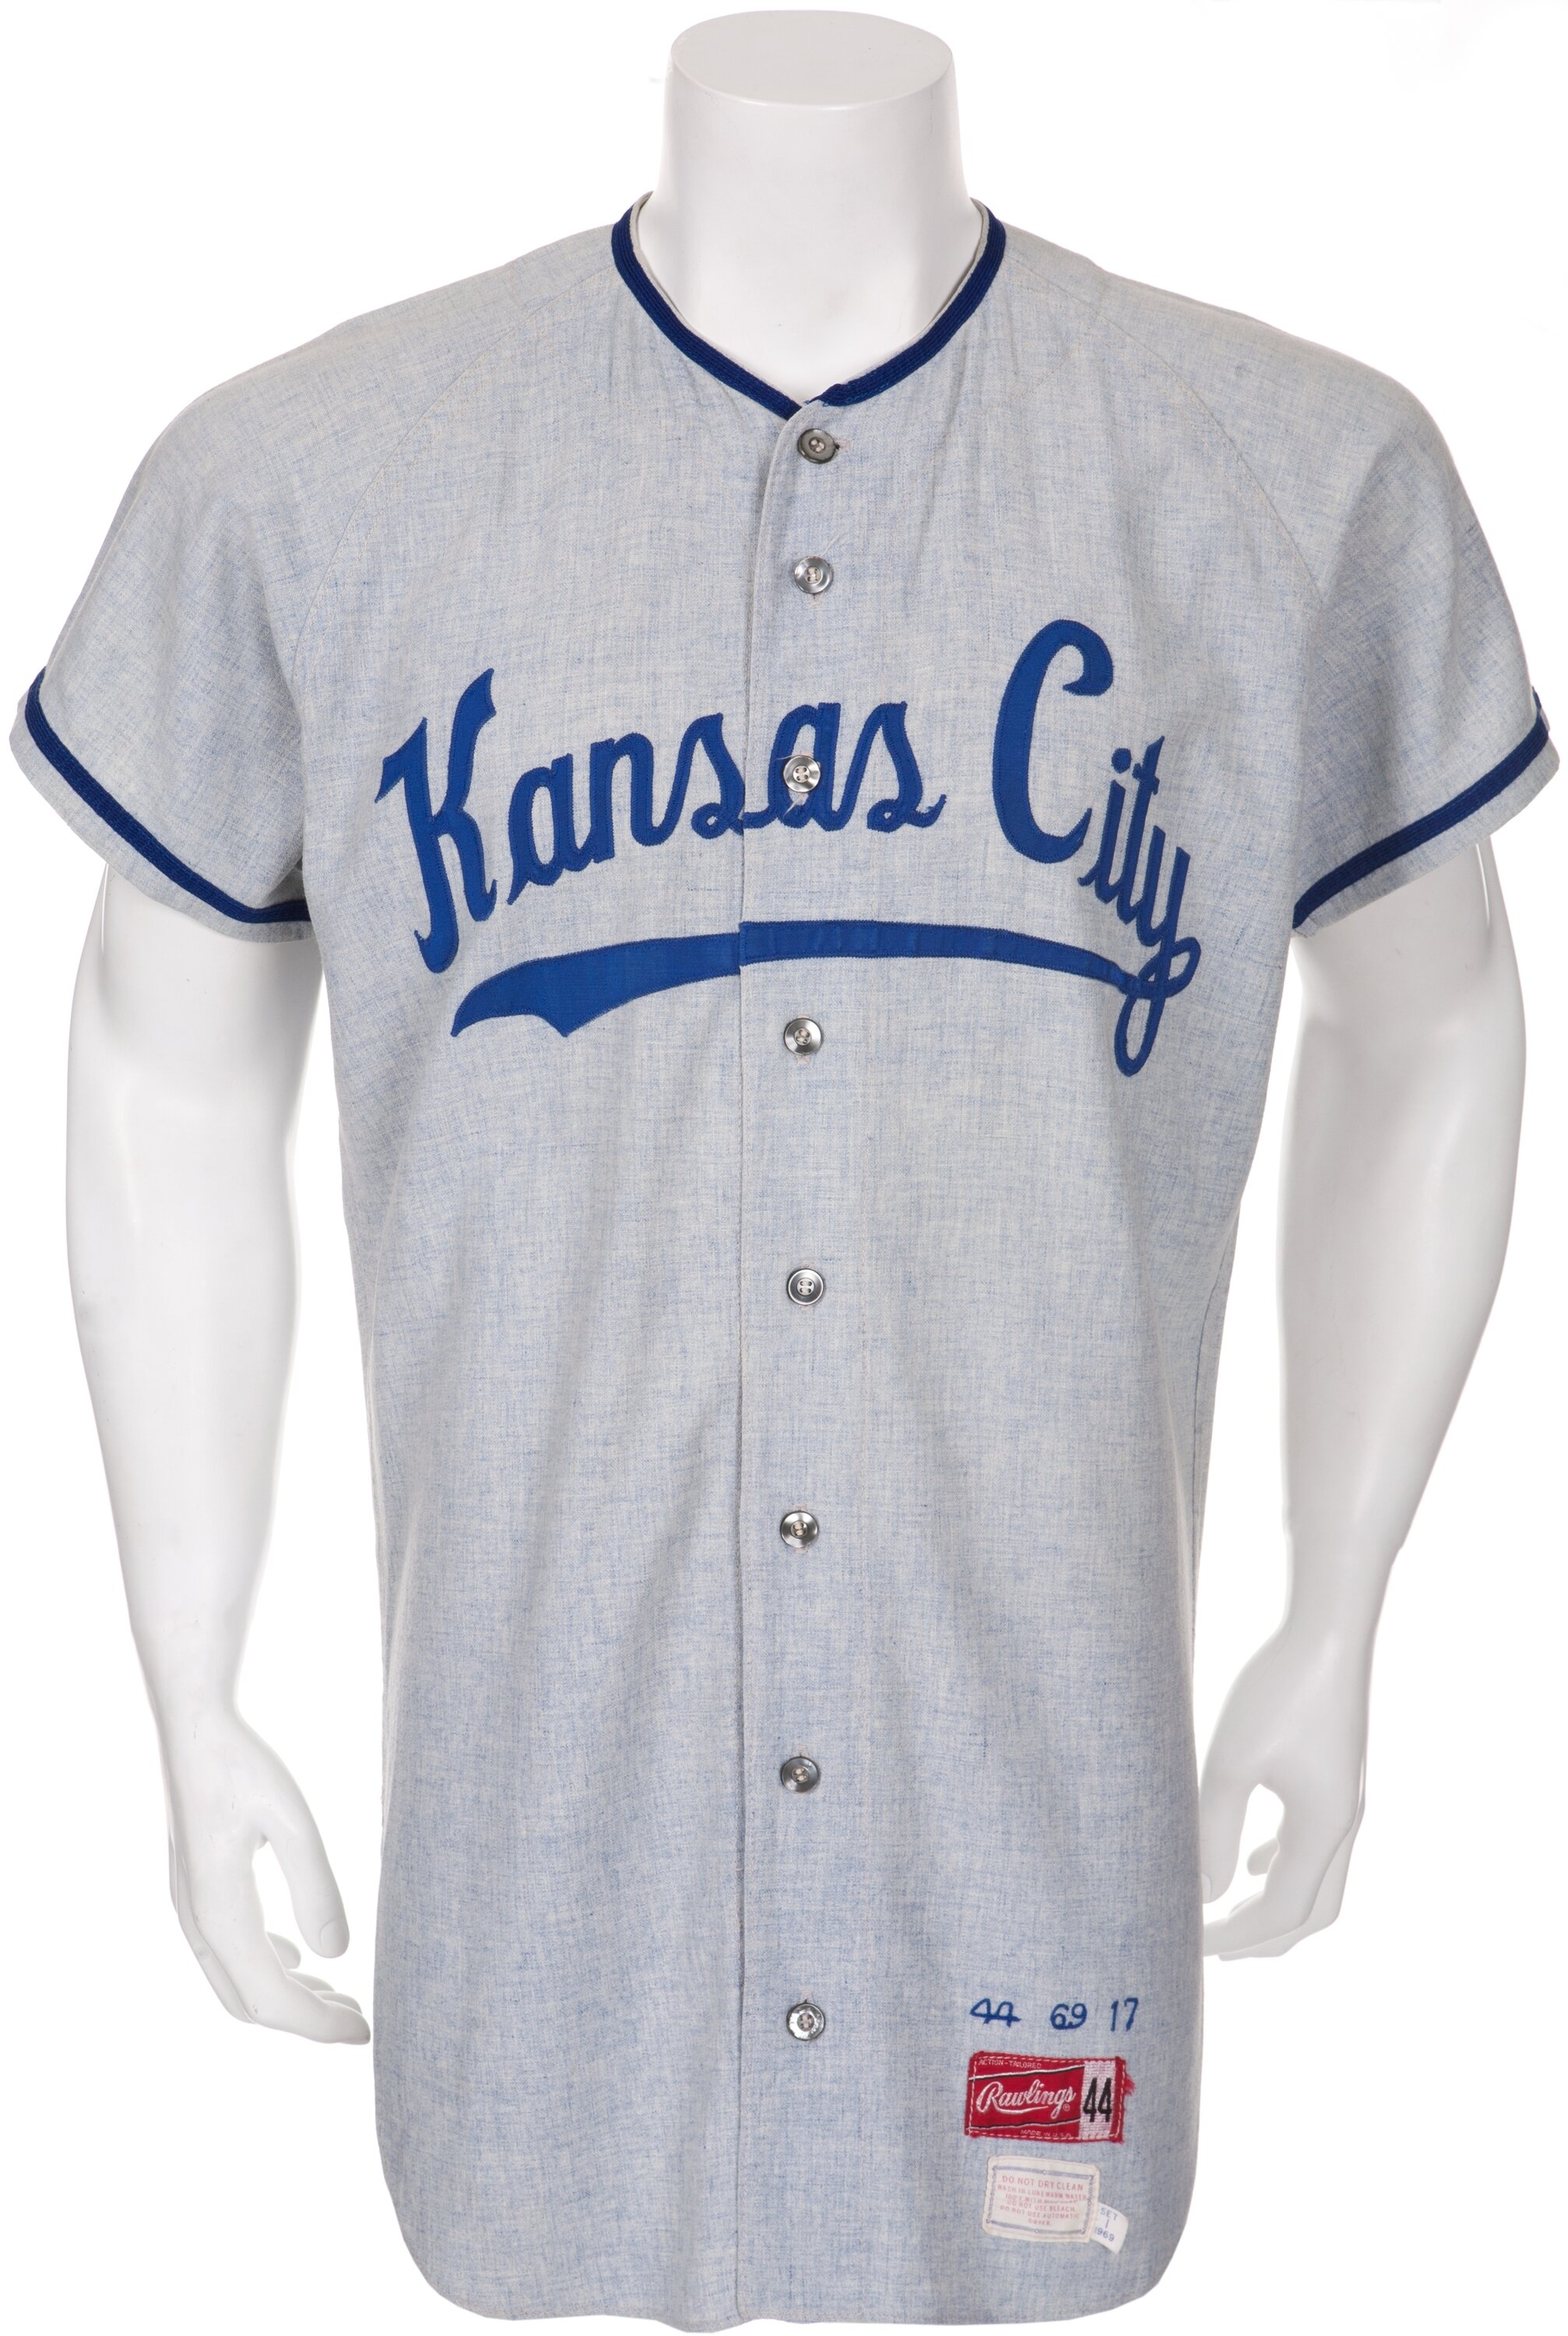 royals jersey outfit